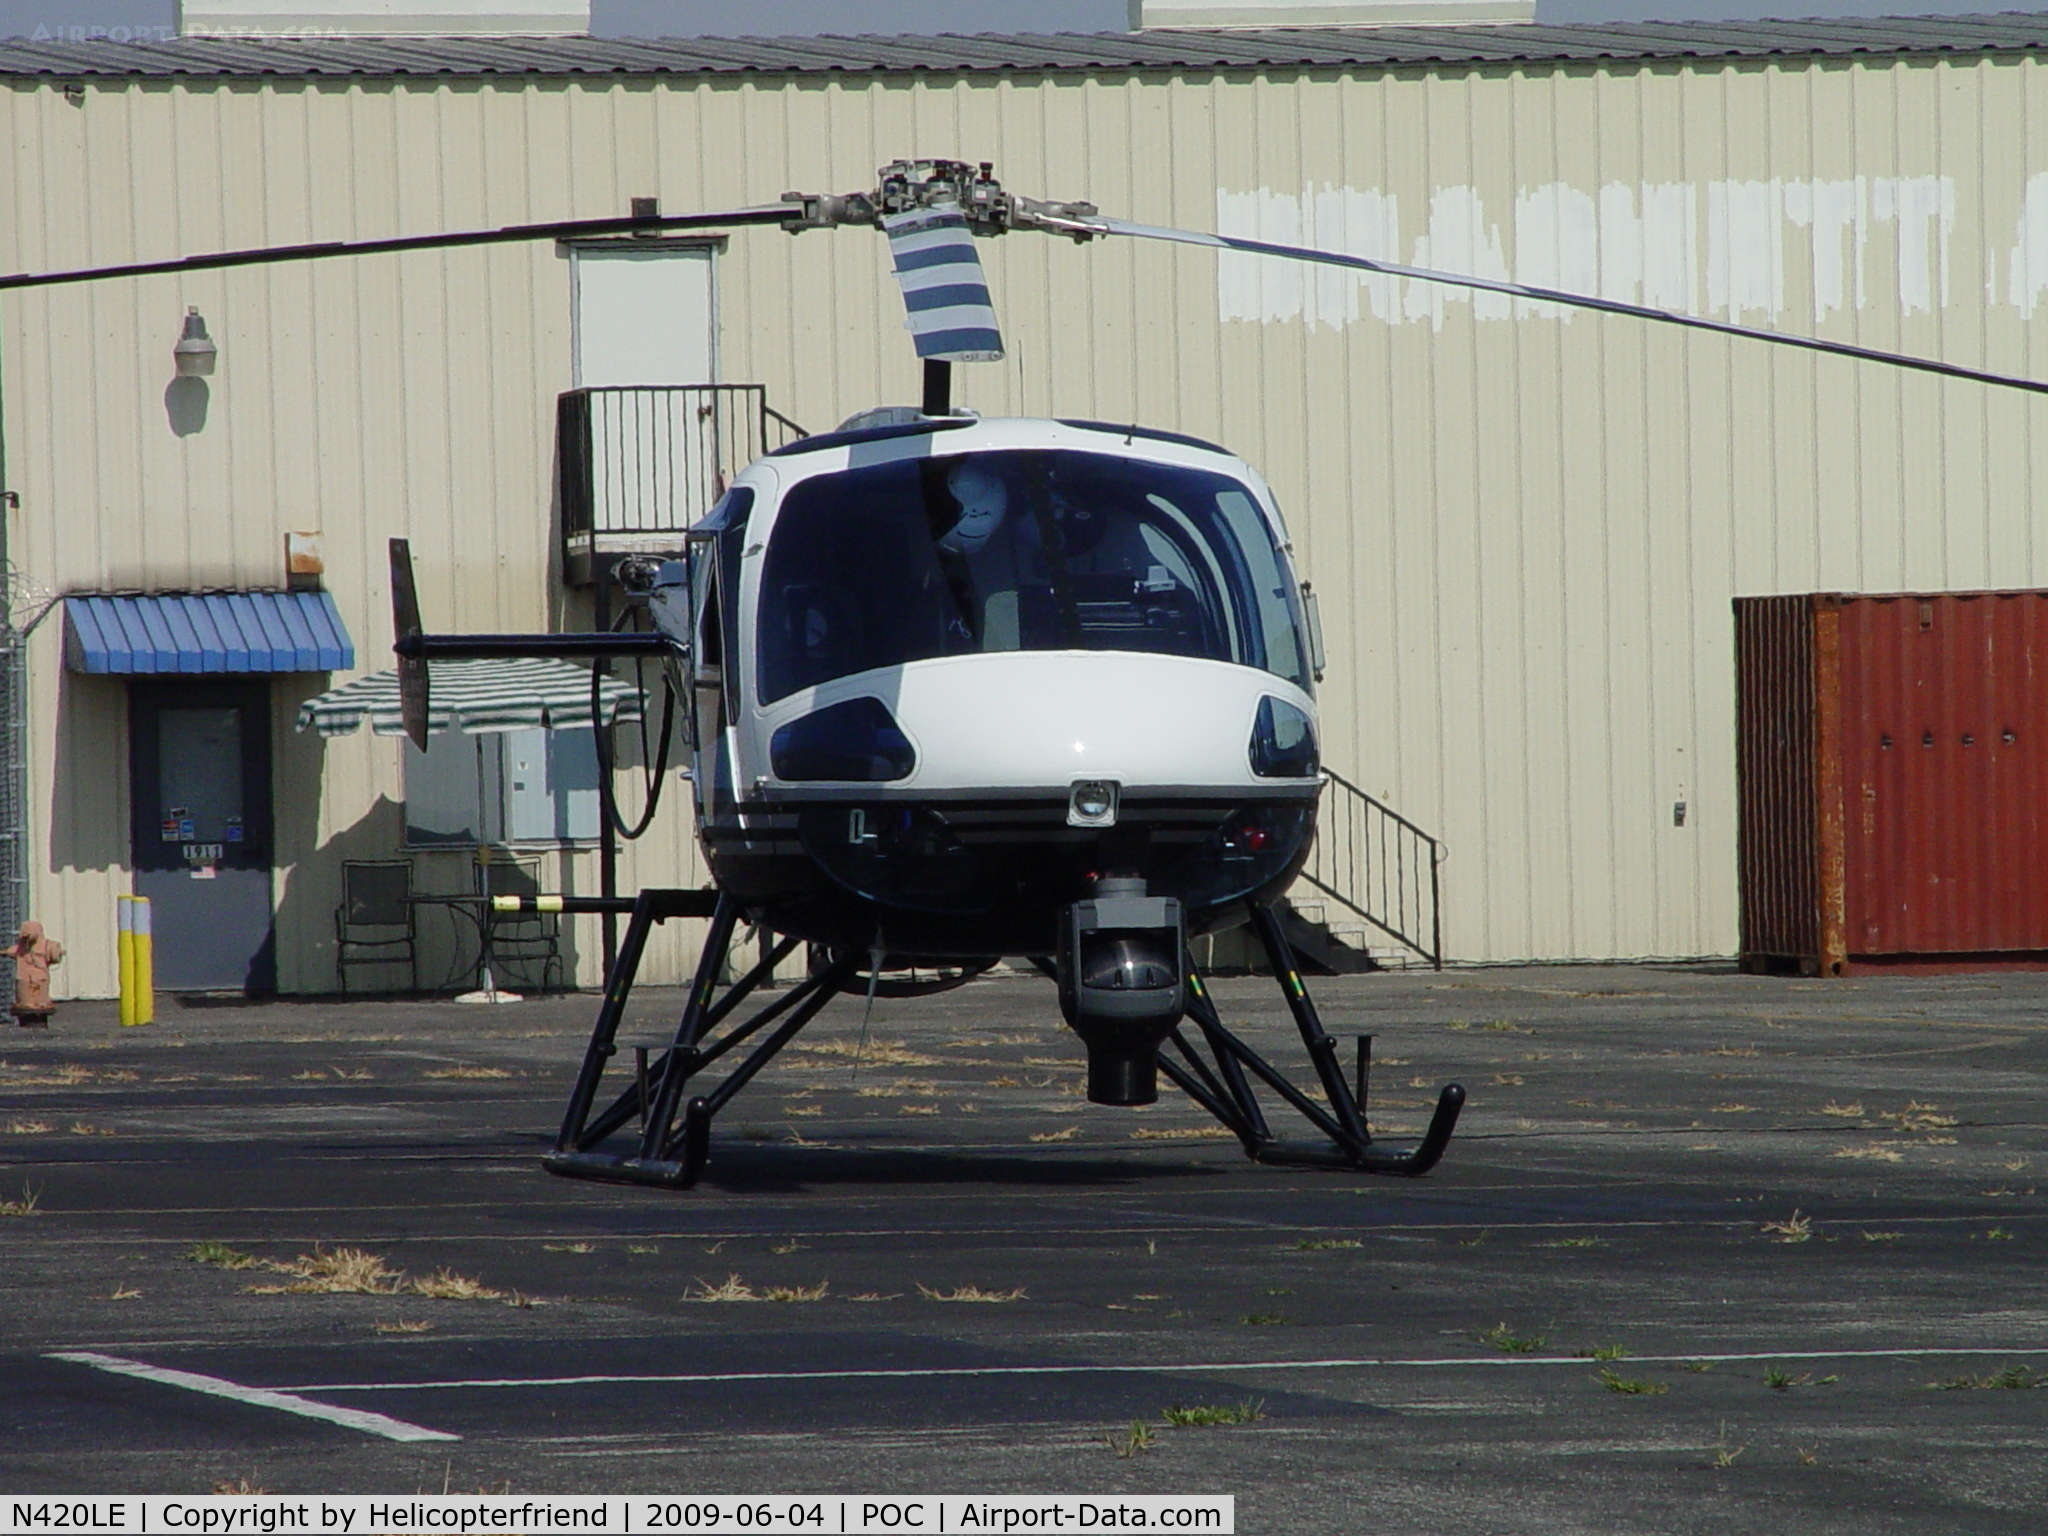 N420LE, 2006 Enstrom 480B C/N 5101, Waiting for fuel truck at Eagle Helicopter